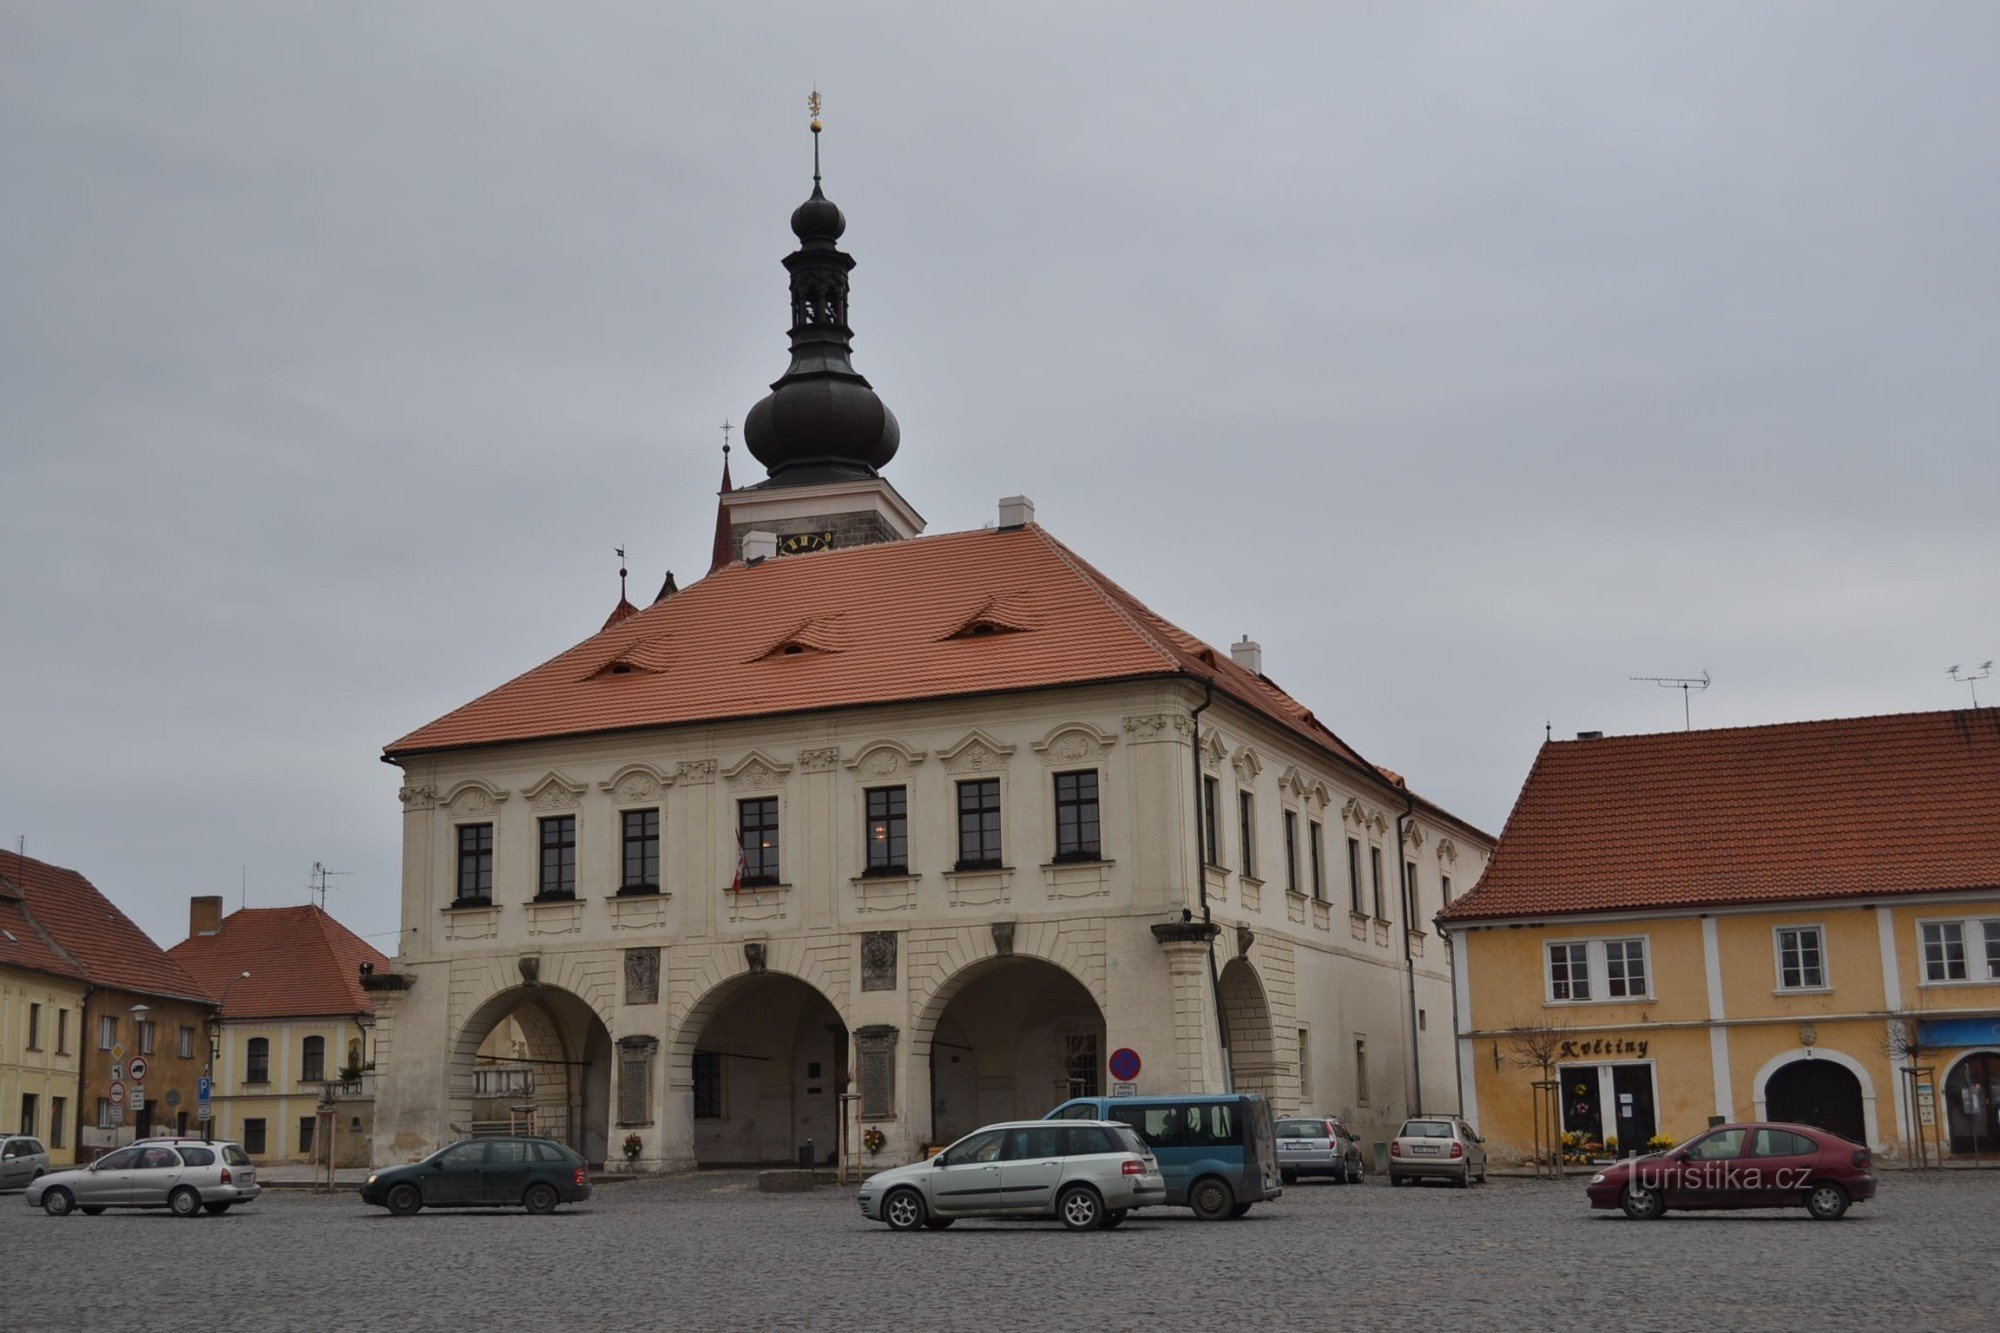 Baroque town hall